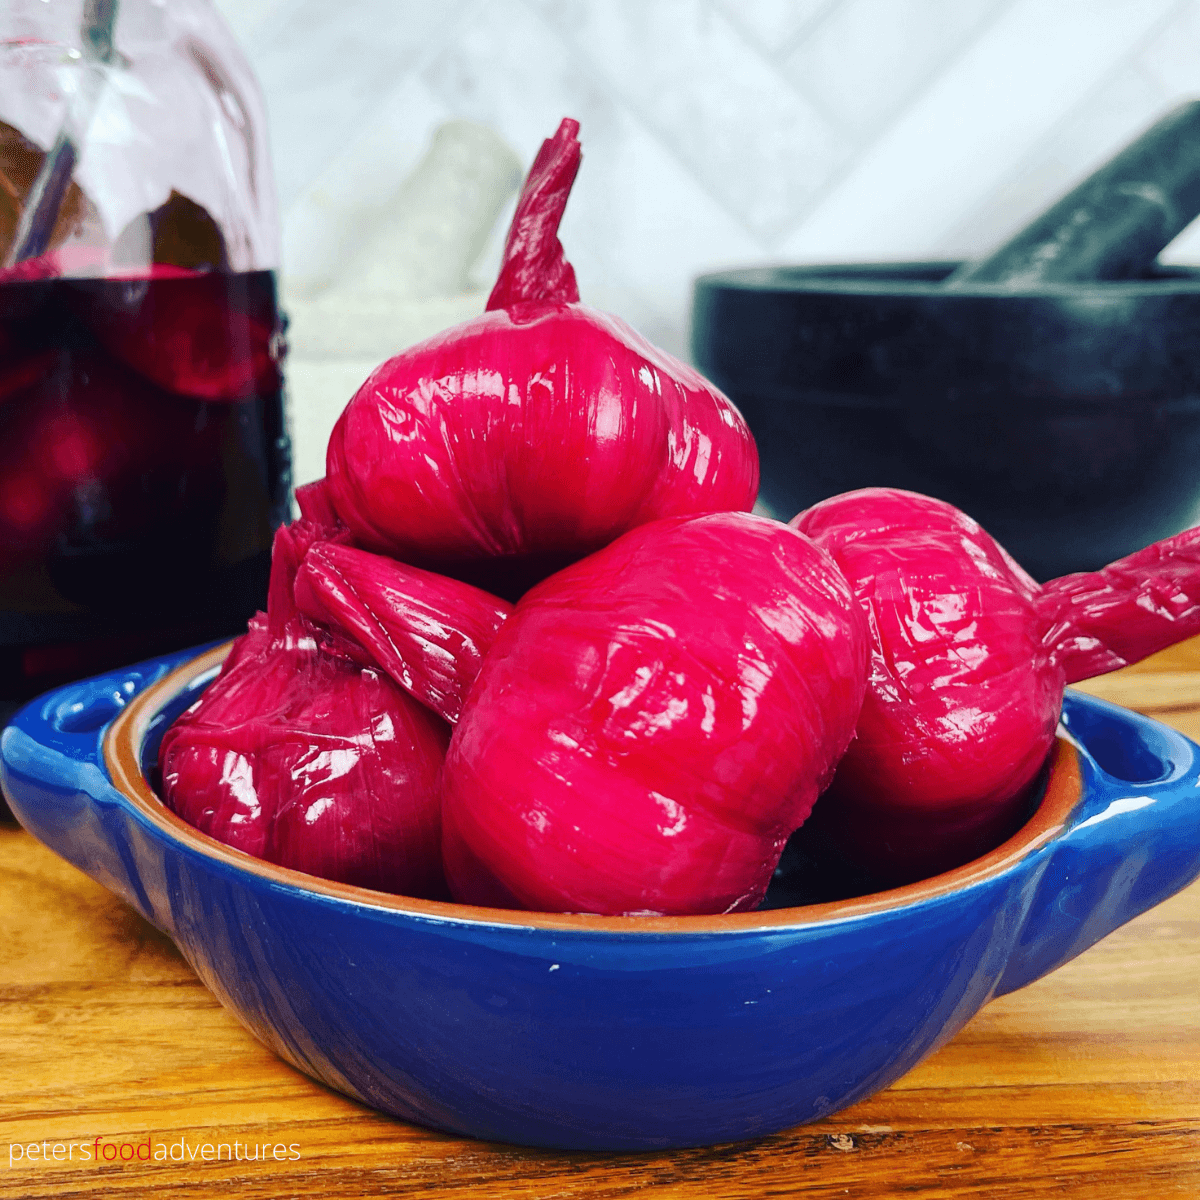 I think this is one of the coolest Pickled Garlic recipes on the internet! Bright, colorful and tasty. In Russian, we call it Marinated Garlic (Маринованный чеснок). The bright pink, almost fuchsia color of the garlic head from the pickled beets, will be the talk of the dinner table!